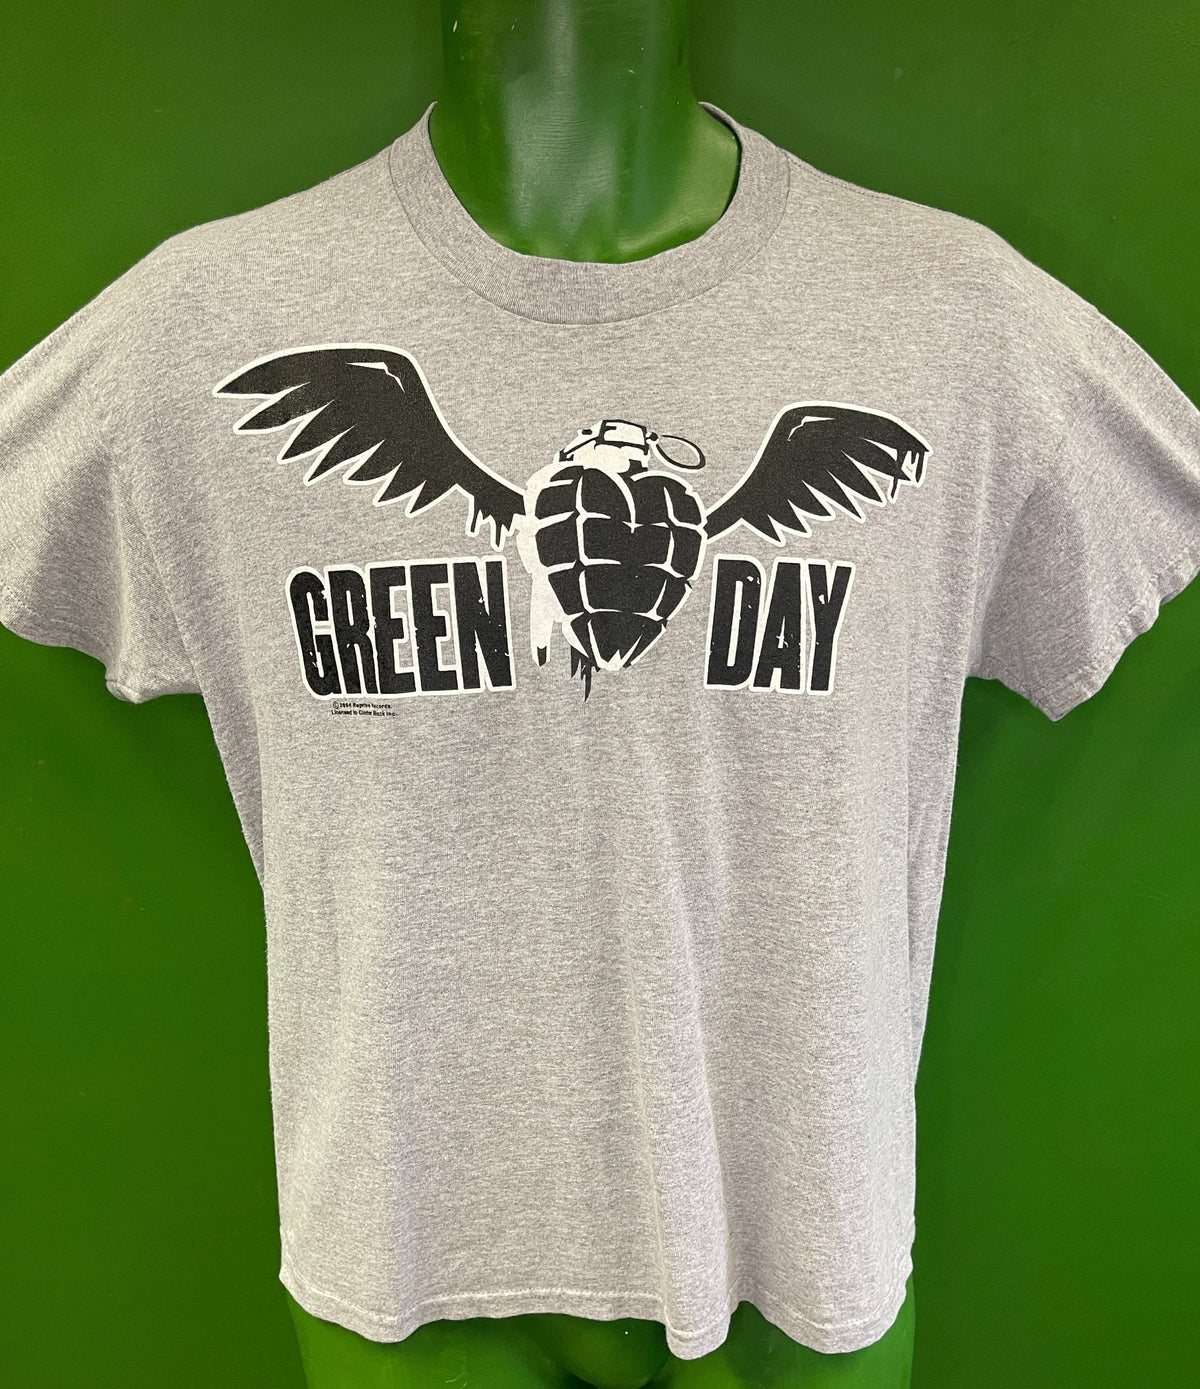 GREEN DAY Heathered Grey Band T-Shirt Youth Large 14-16